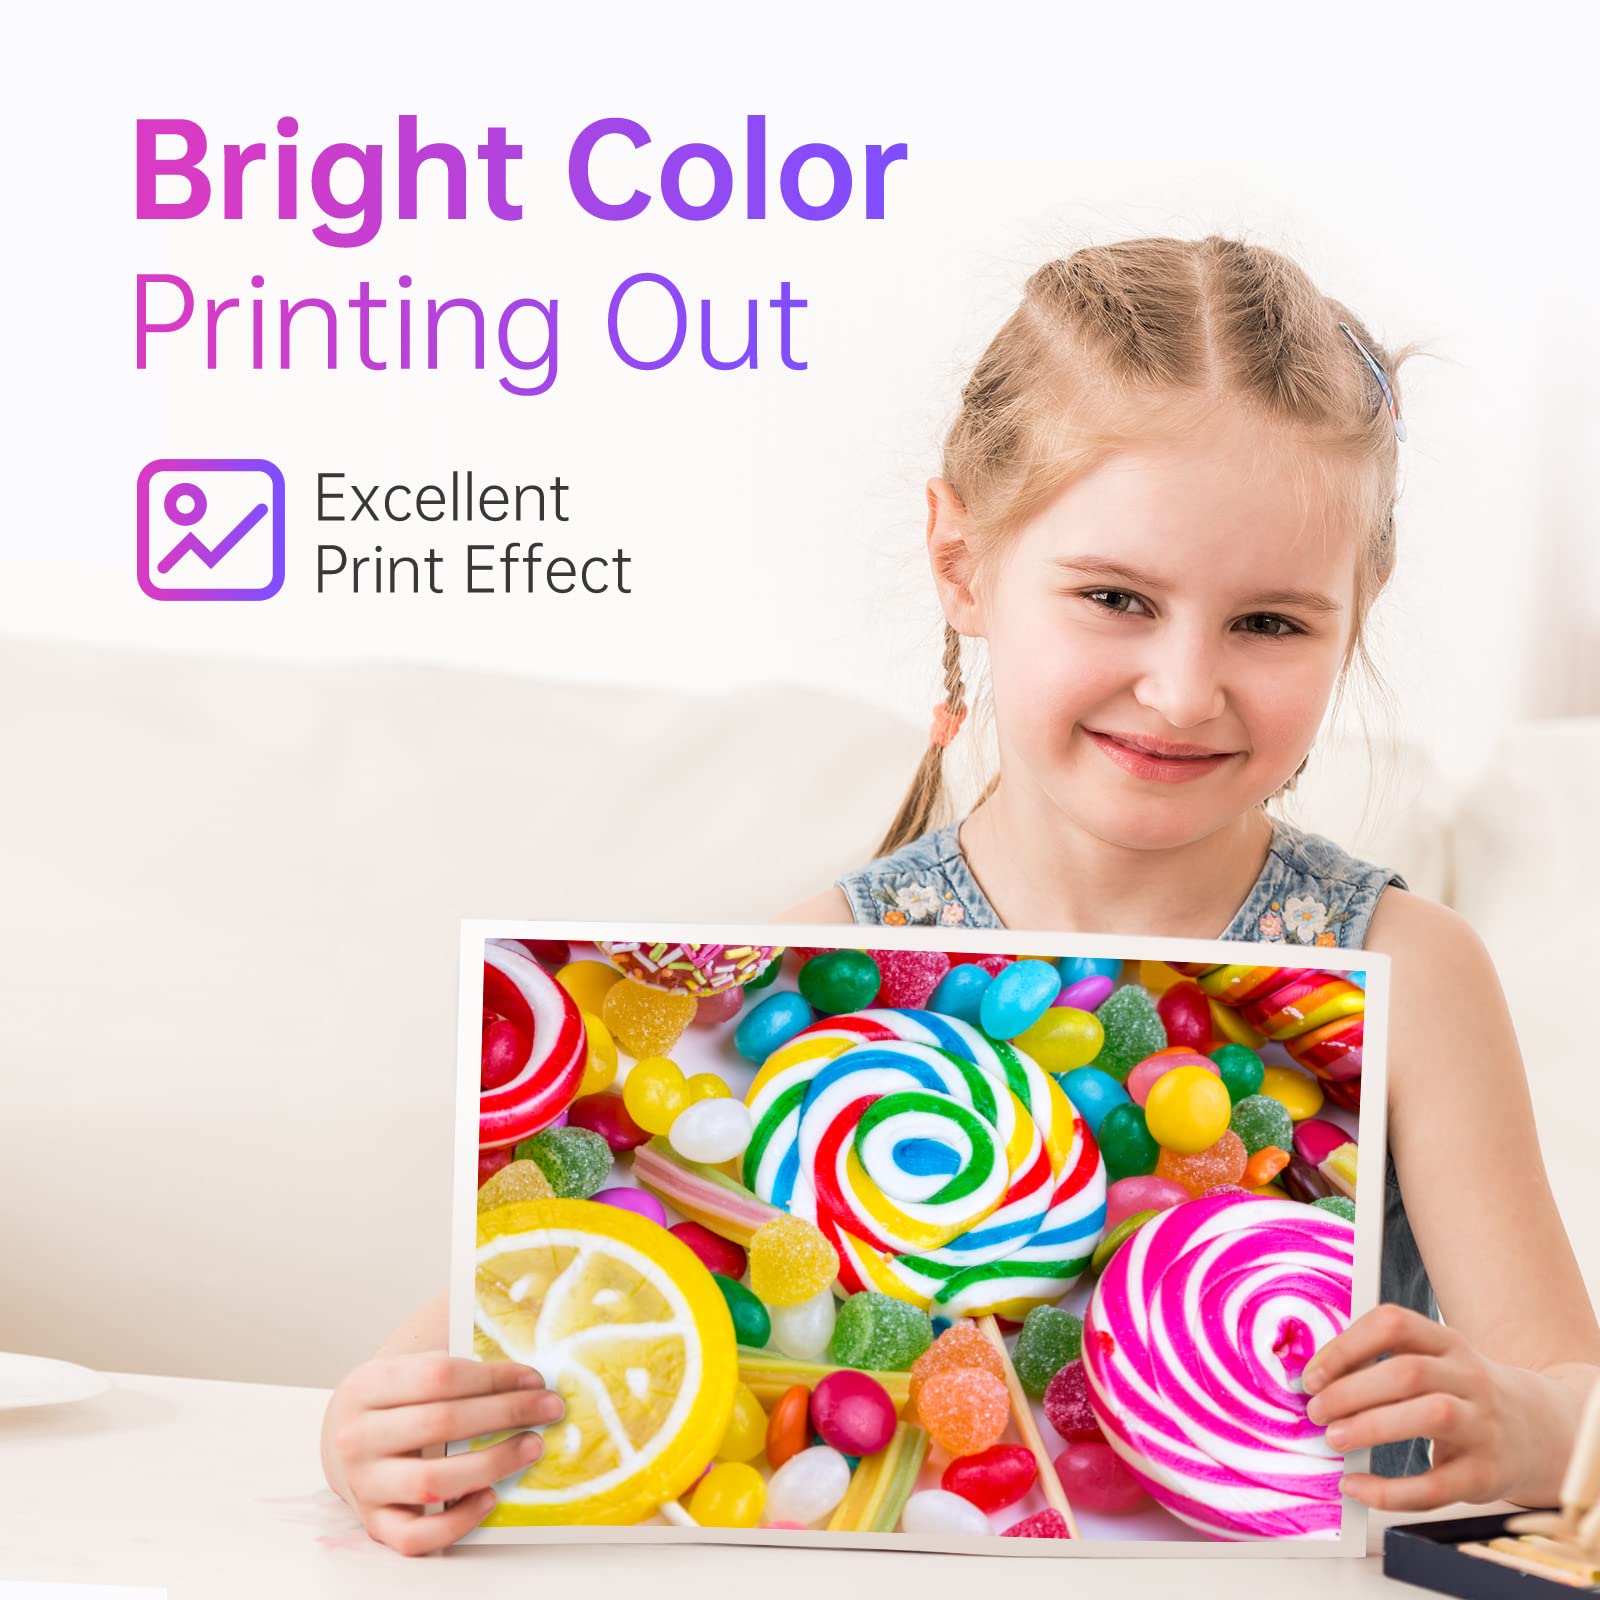 Bright Color Printing Out: Young girl holding a vibrantly printed picture demonstrating the excellent print quality of LEMERO HP 61XL ink cartridges, showcasing bright and vivid colors.